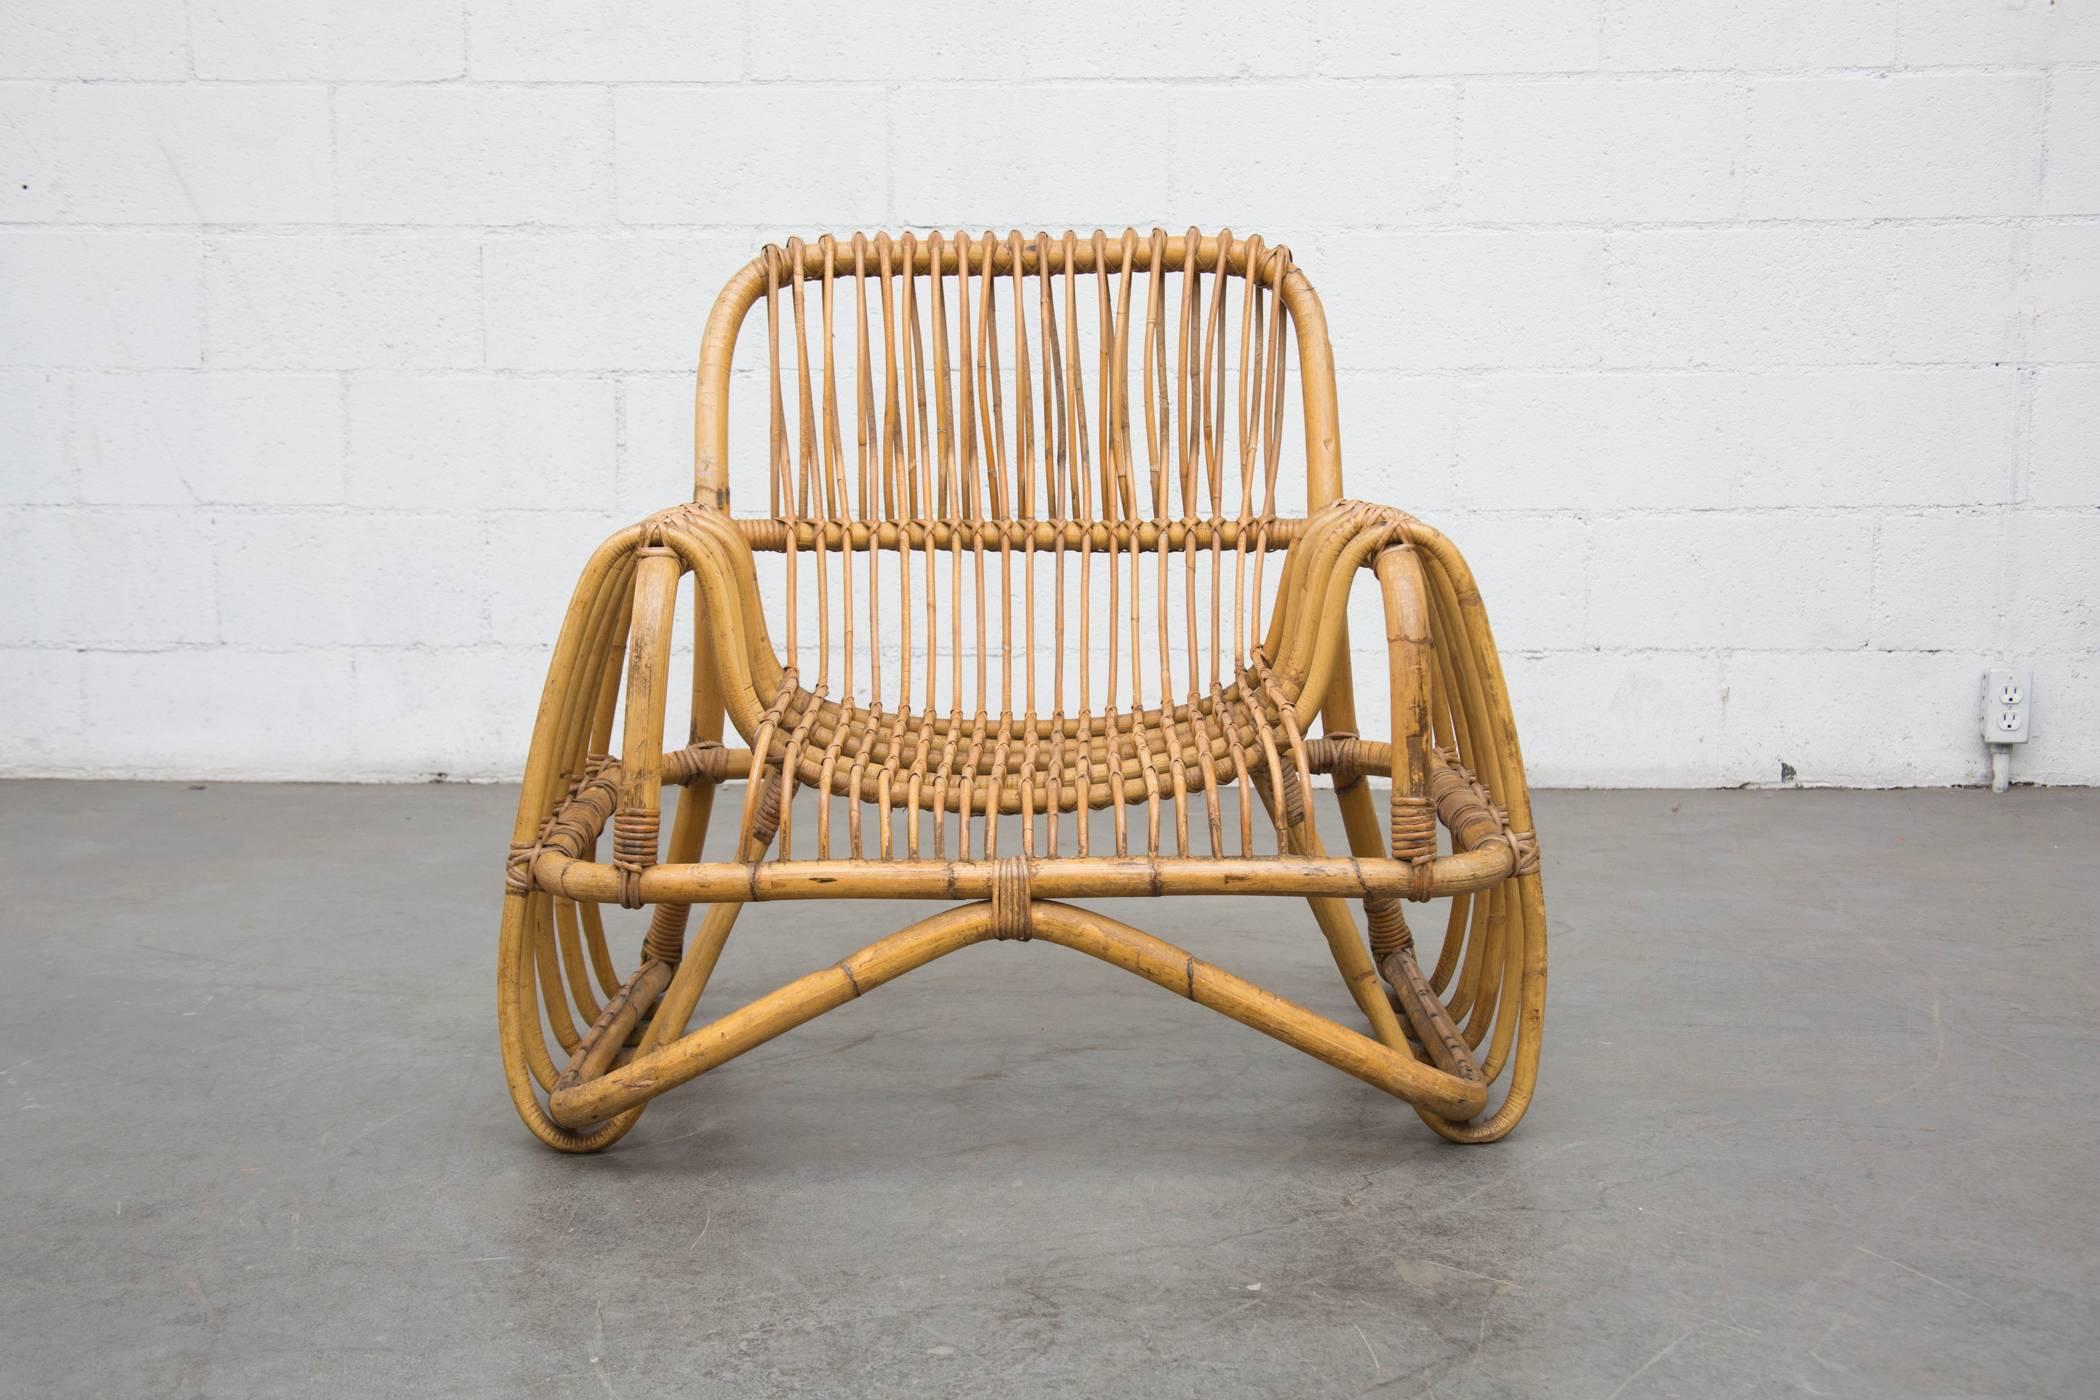 Impressive bent bamboo lounge chair in the style of Franco Albini. In original condition with some wear and sun discoloration consistent with age and use.